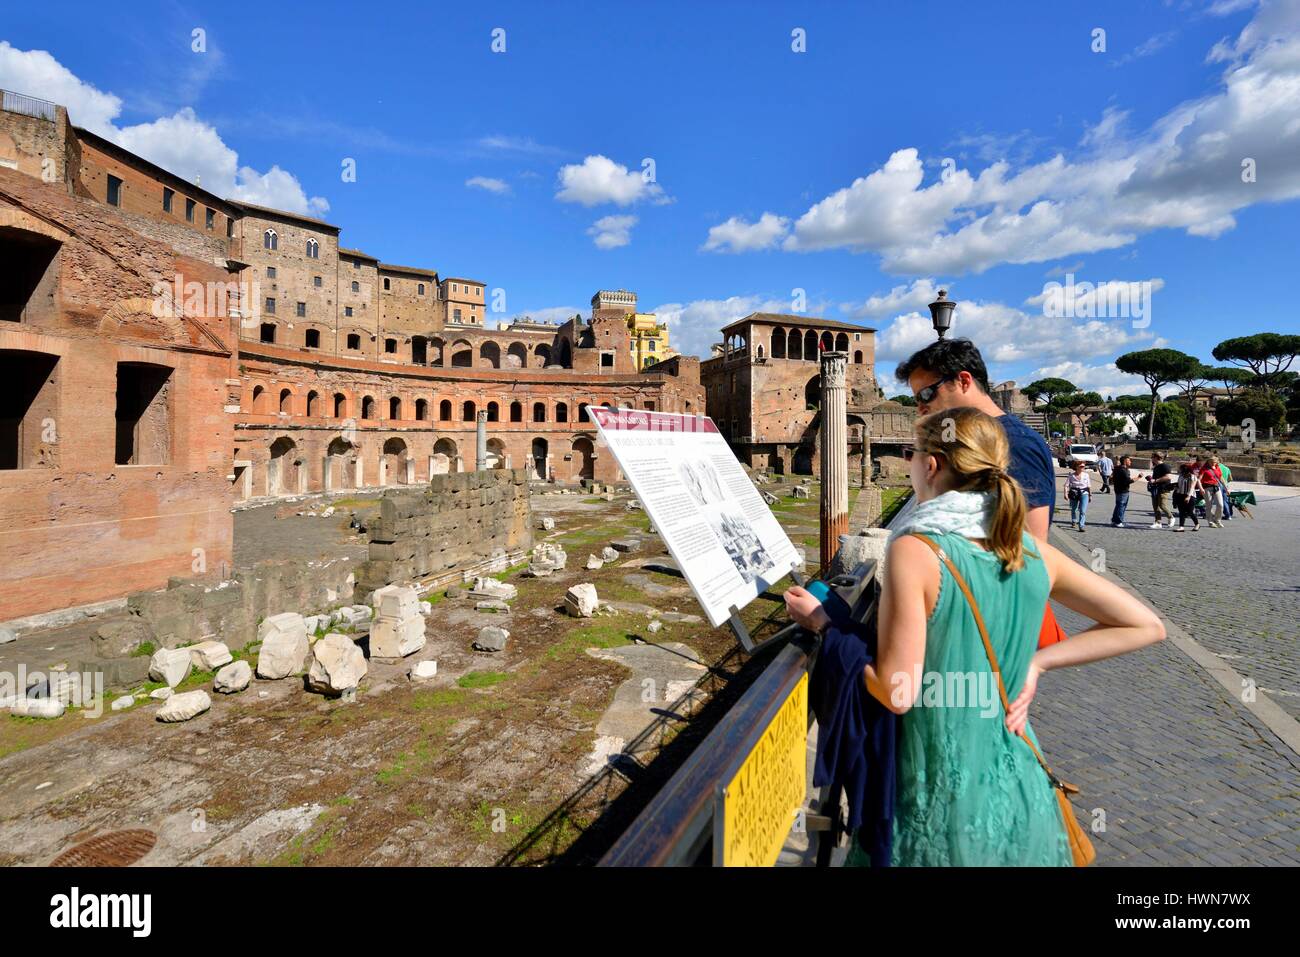 Italy, Lazio, Rome, historical centre listed as World Heritage by UNESCO, the Imperial Fora or Fori Imperiali, series of public squares, constructed between 46 BC and 113 AD and were the center of the Roman Republic and of the Roman Empire, the Trajan's Forum Stock Photo